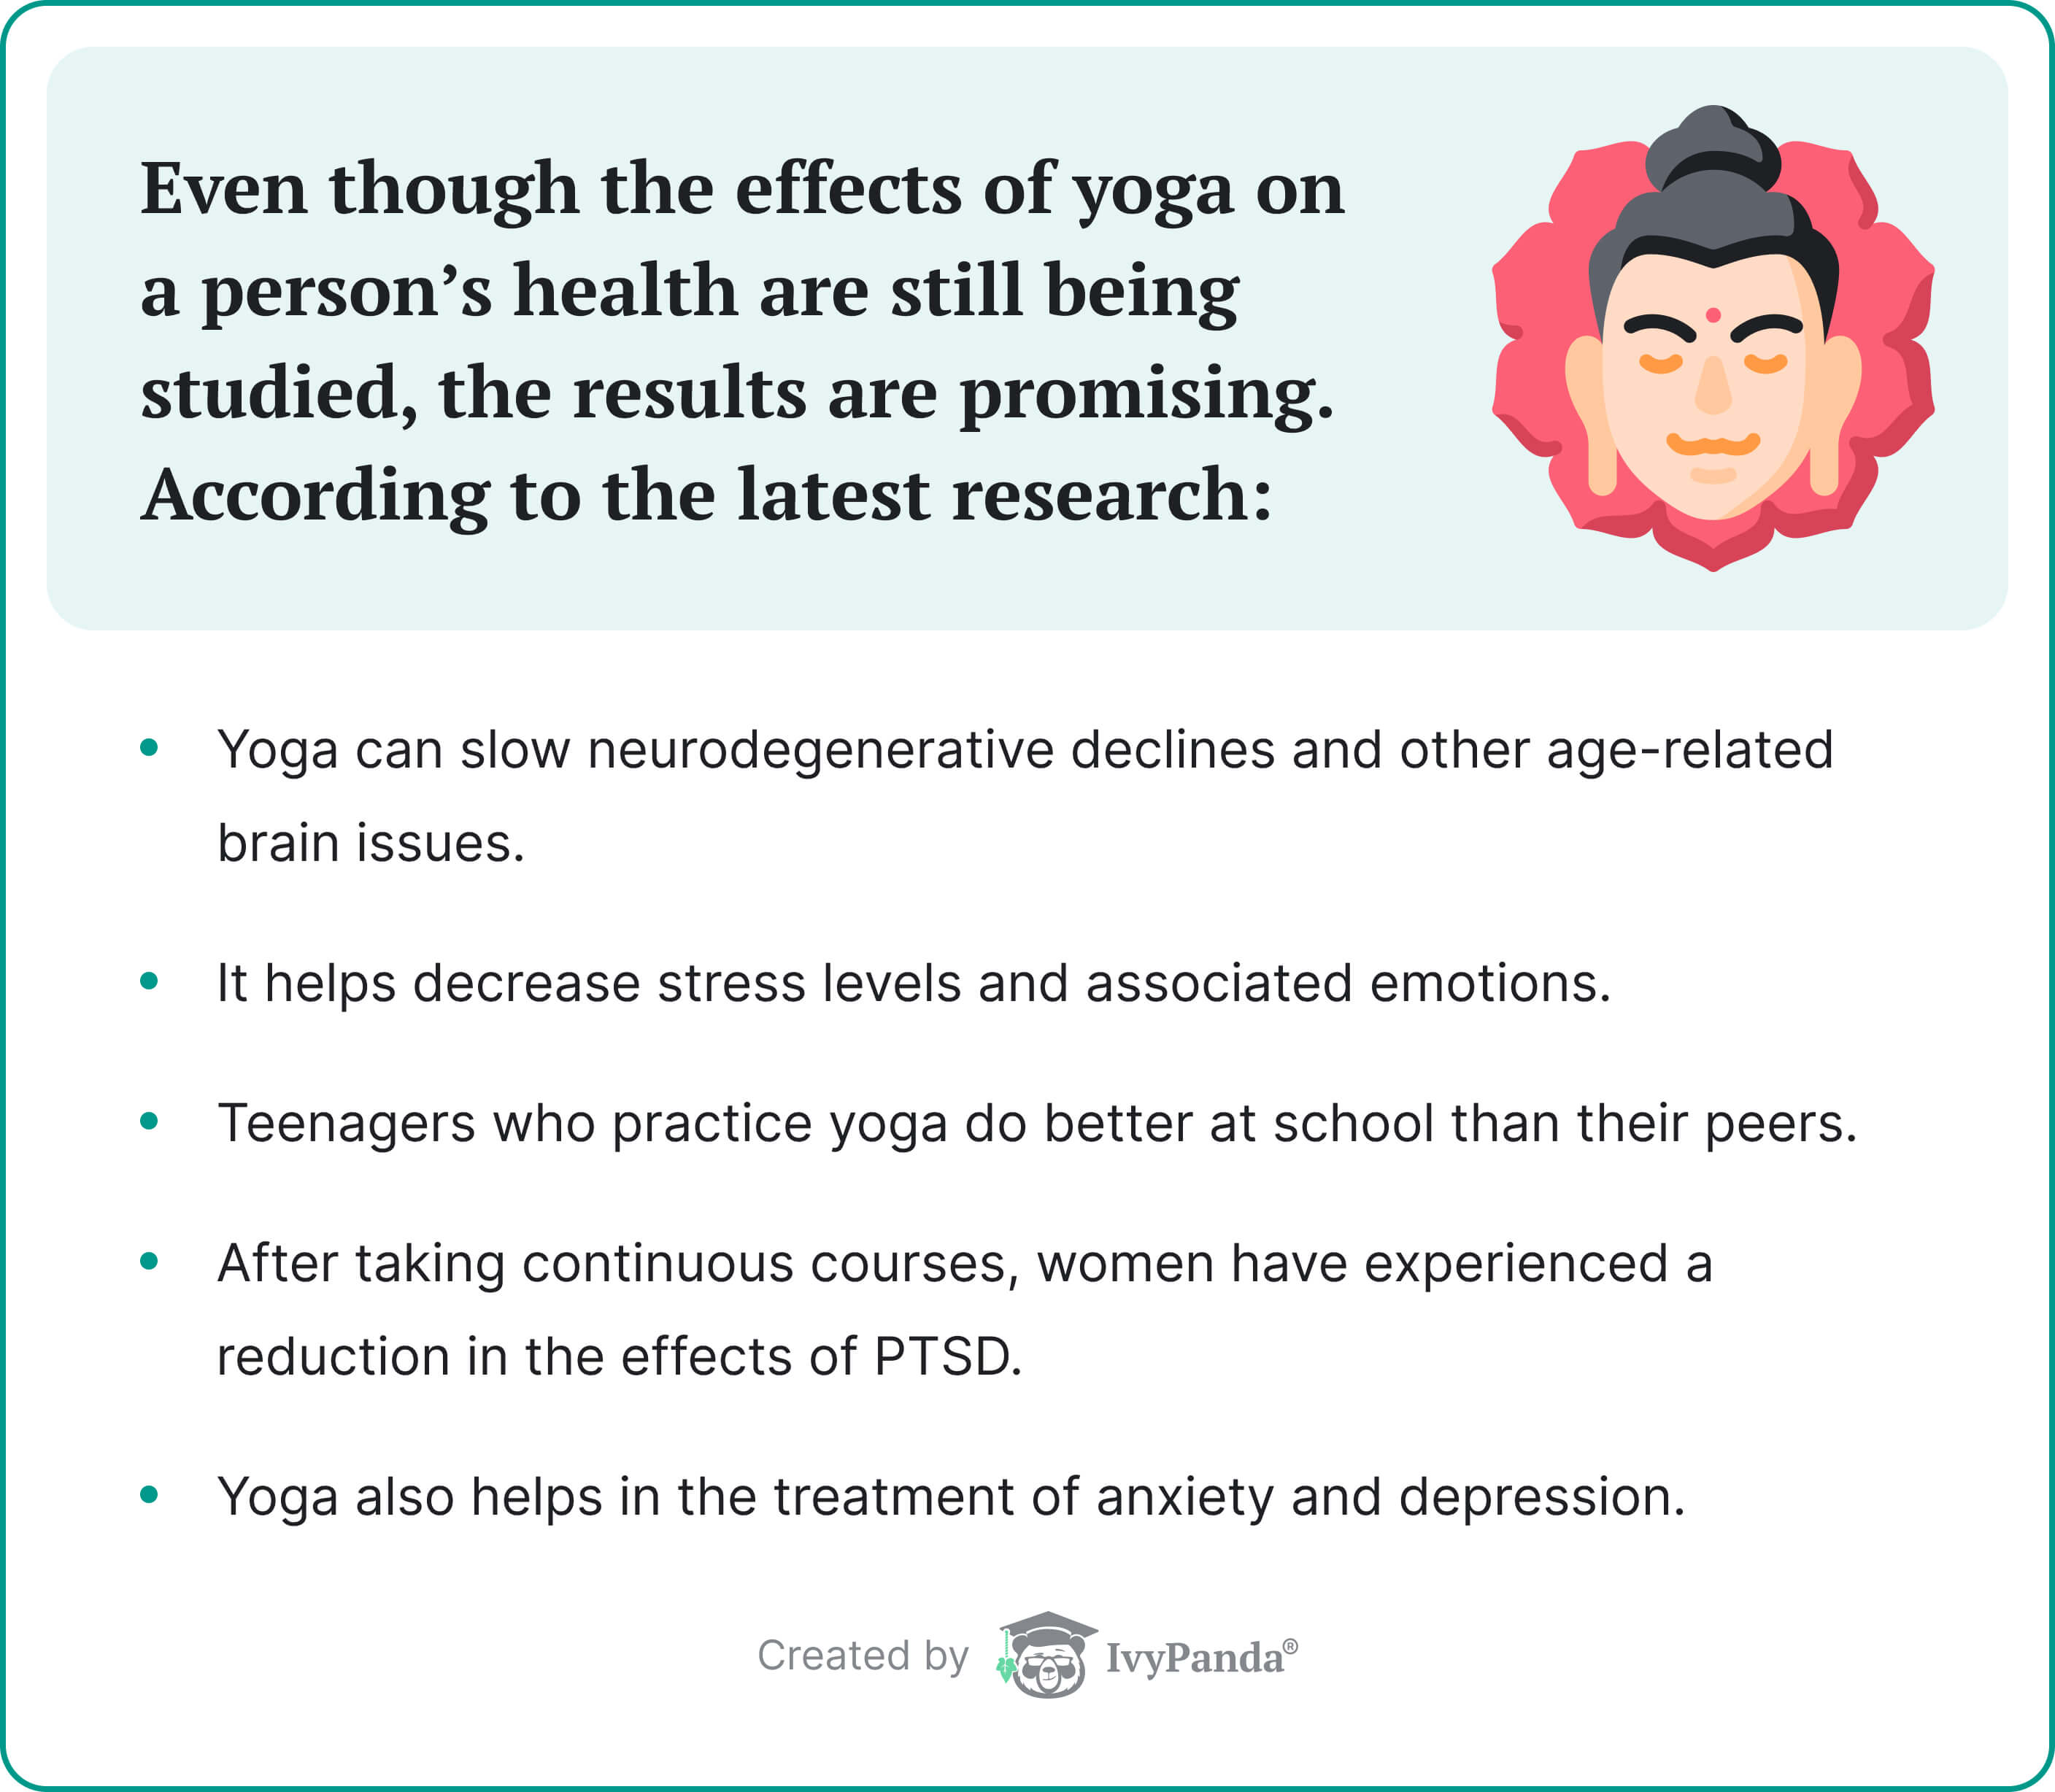 Research on yoga's benefits.